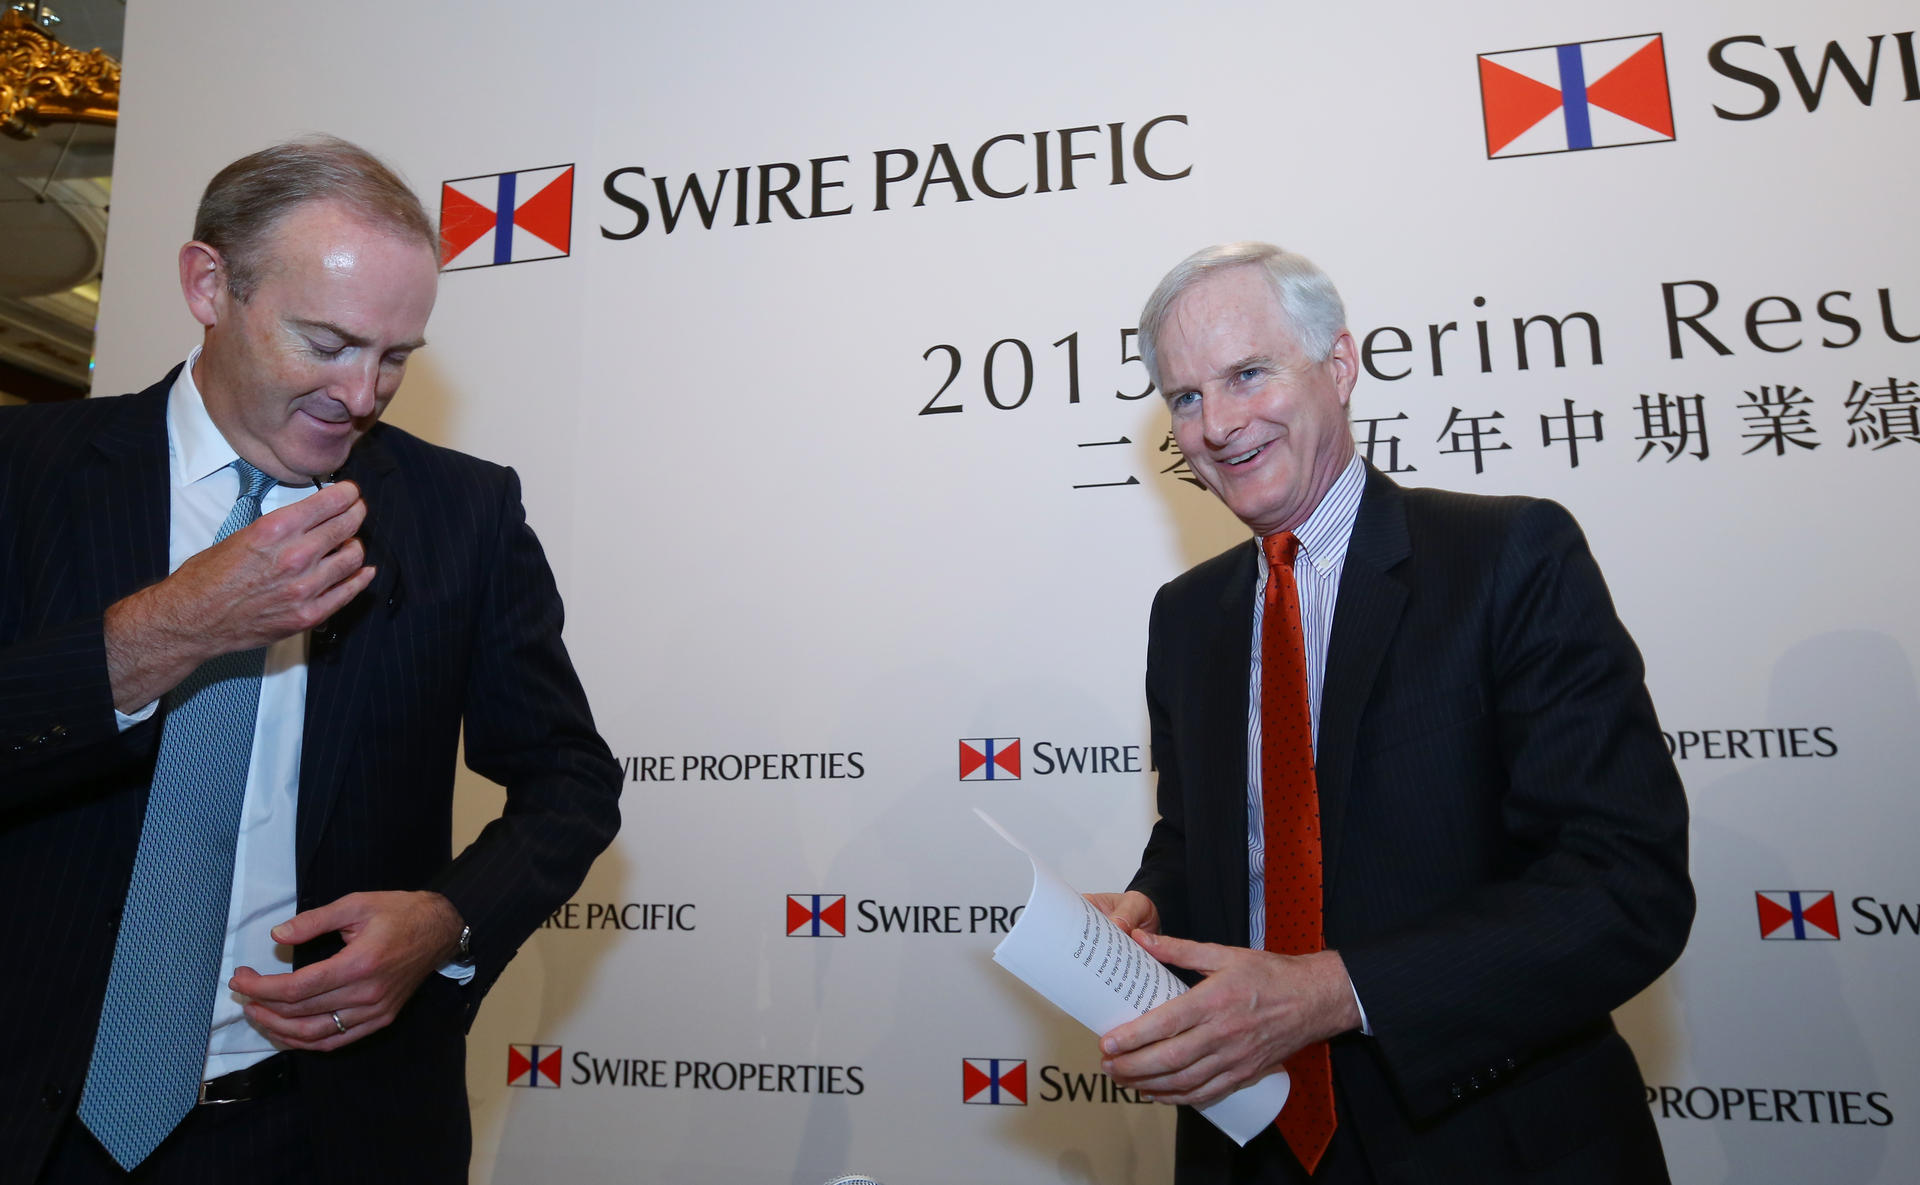 Swire Properties chief executive Guy Bradley (left) and chairman John Slosar at the press briefing to announce the group's first-half results. Photo: Edmond So